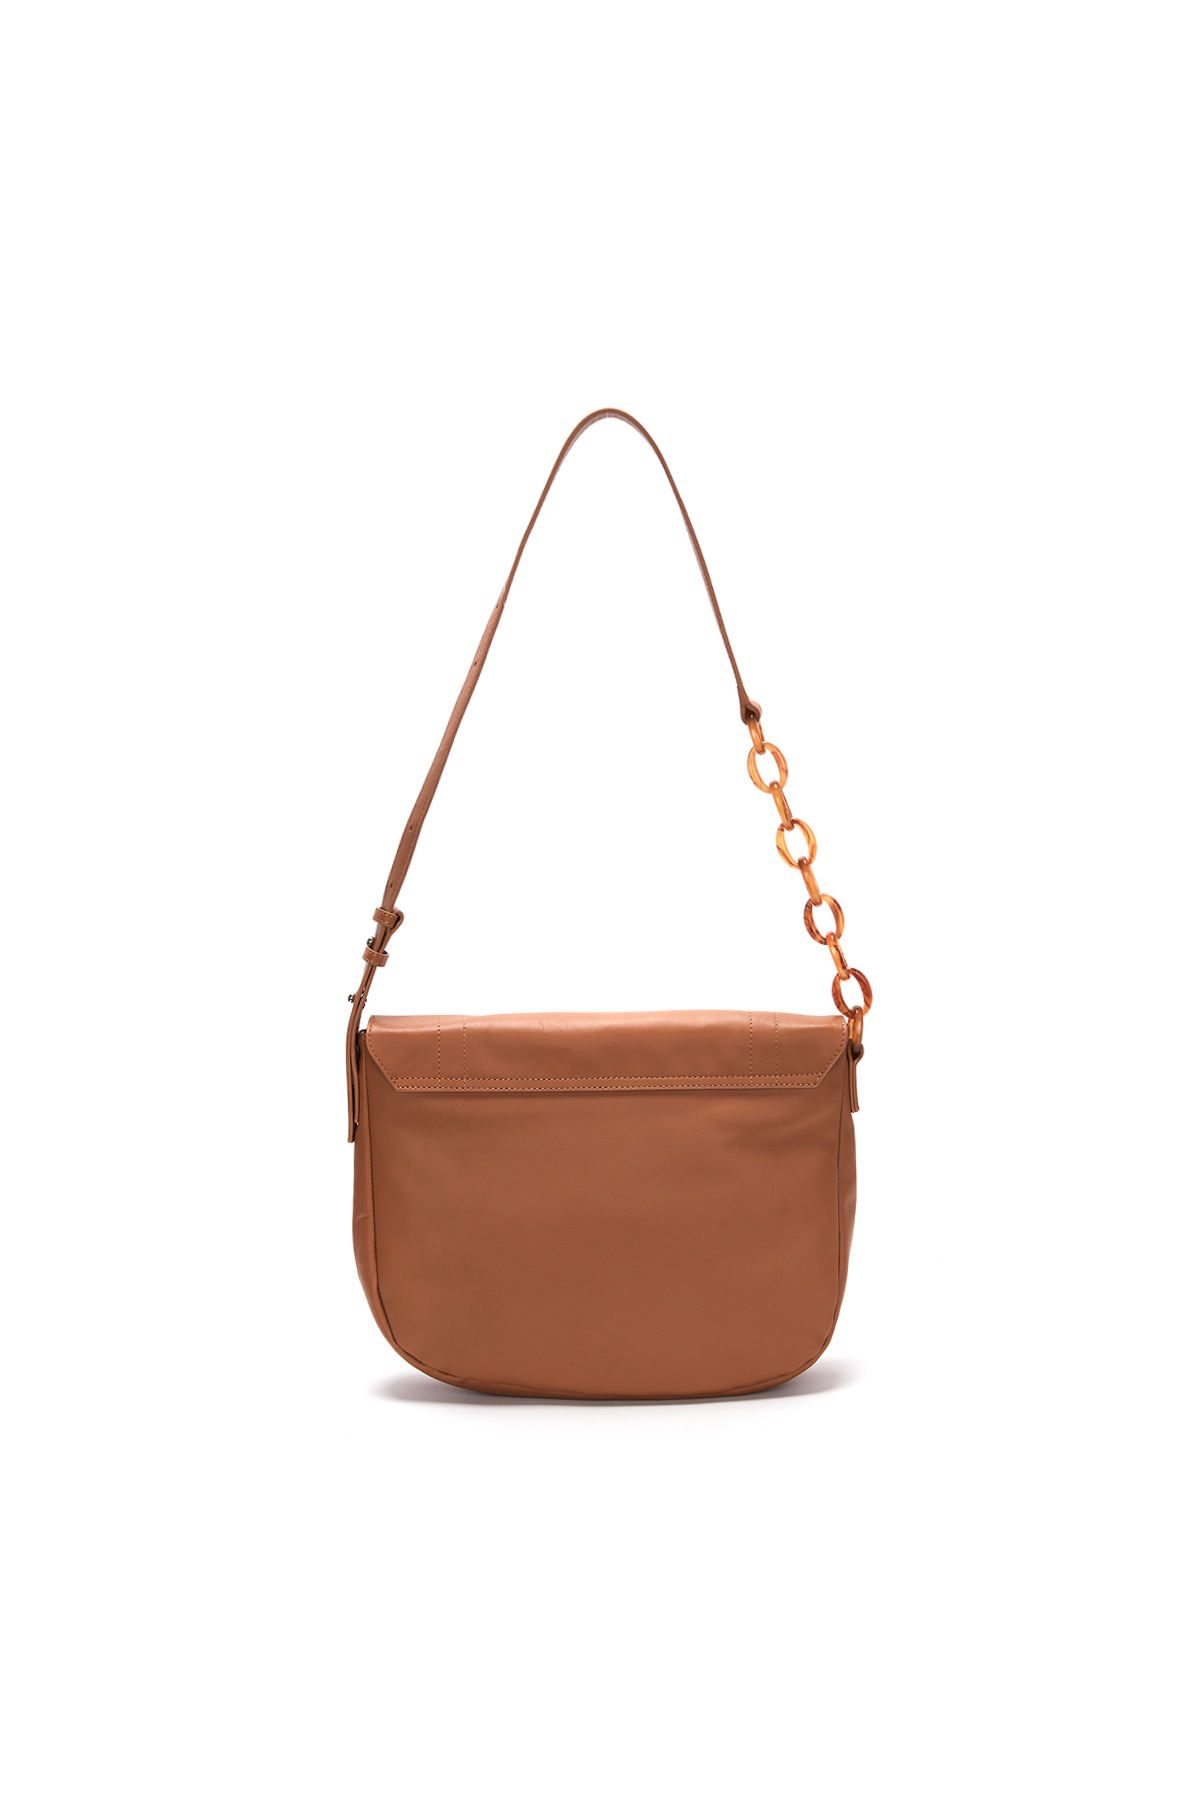 NEW PARIS MIDDLE BAG IN LIGHT BROWN